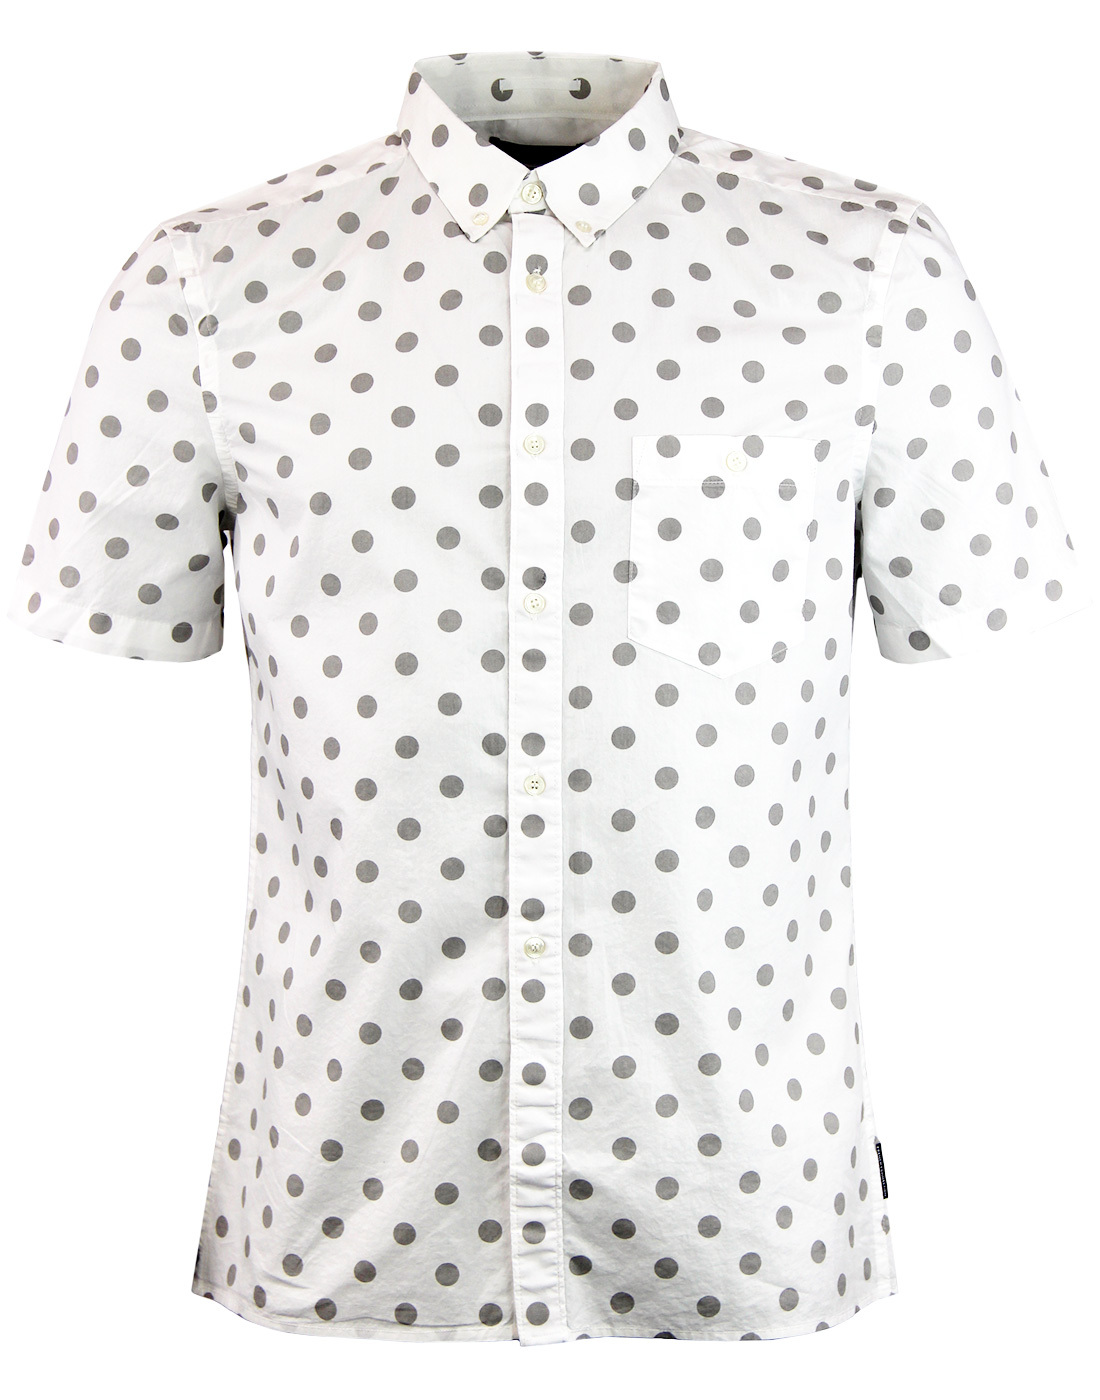 FRENCH CONNECTION Mens Mod 60s Big Polka Dot Shirt in White